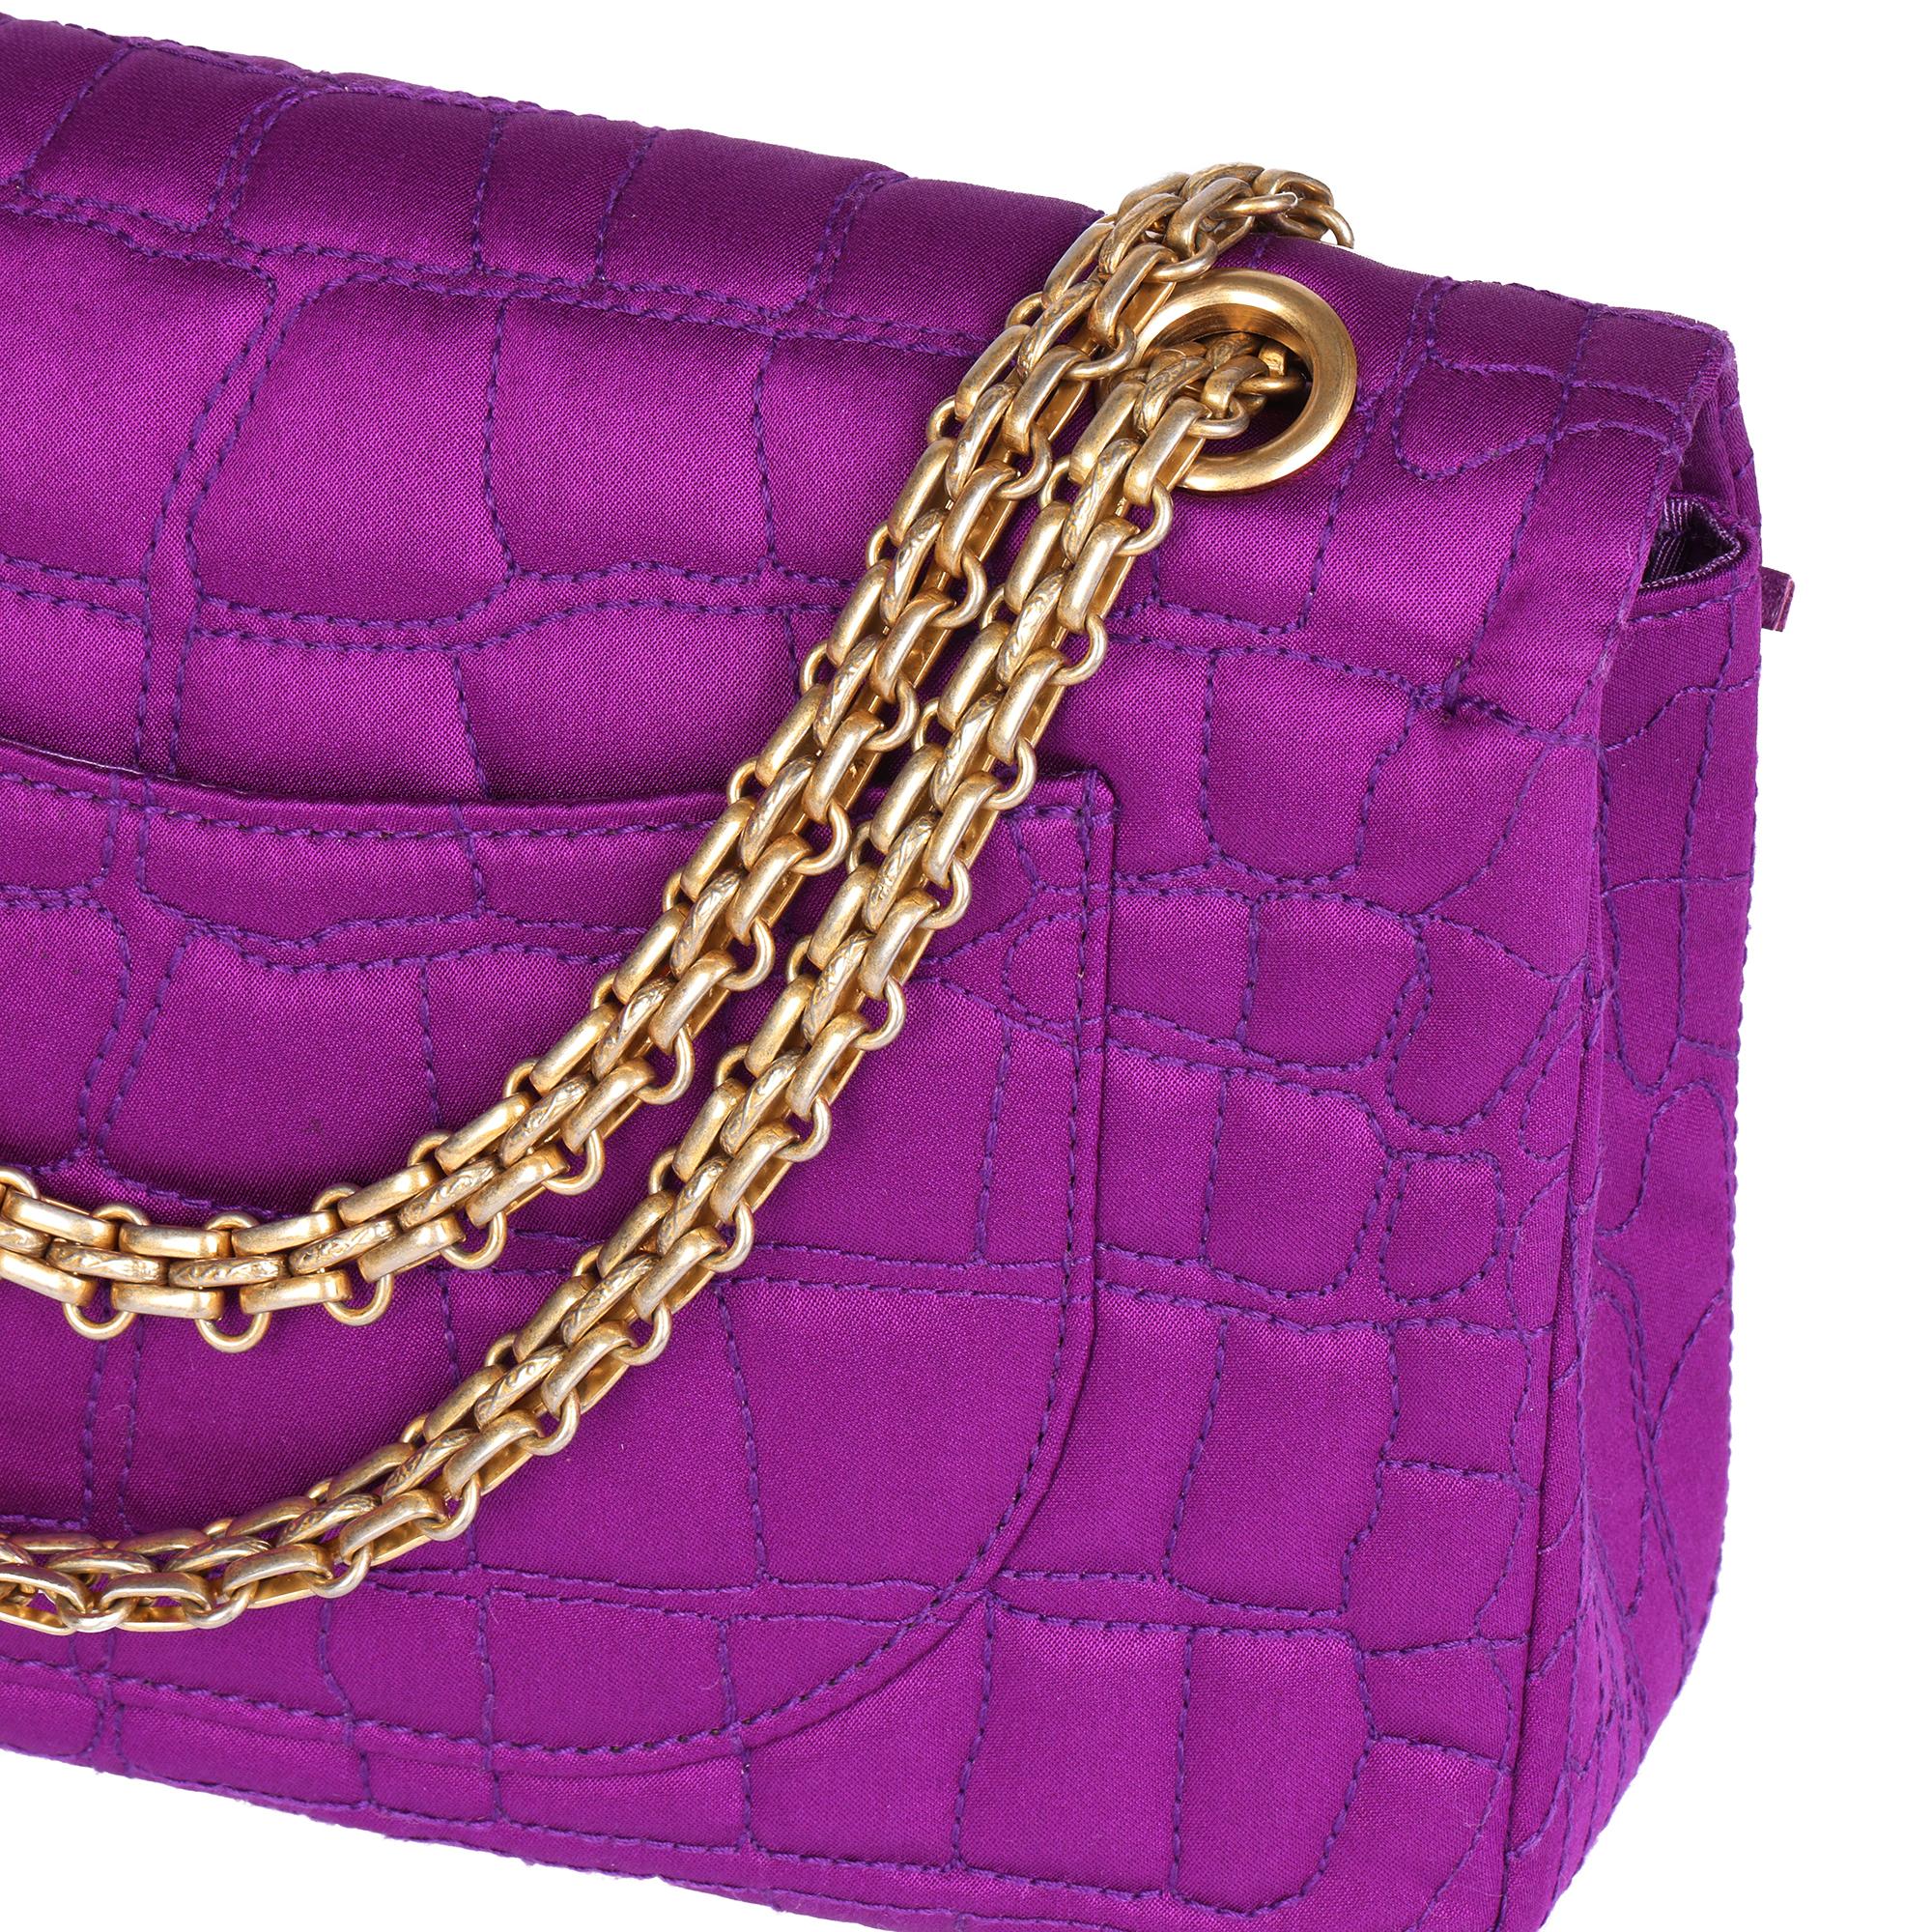 CHANEL Purple Crocodile Embroidered Satin 2.55 224 Reissue Double Flap Bag 2